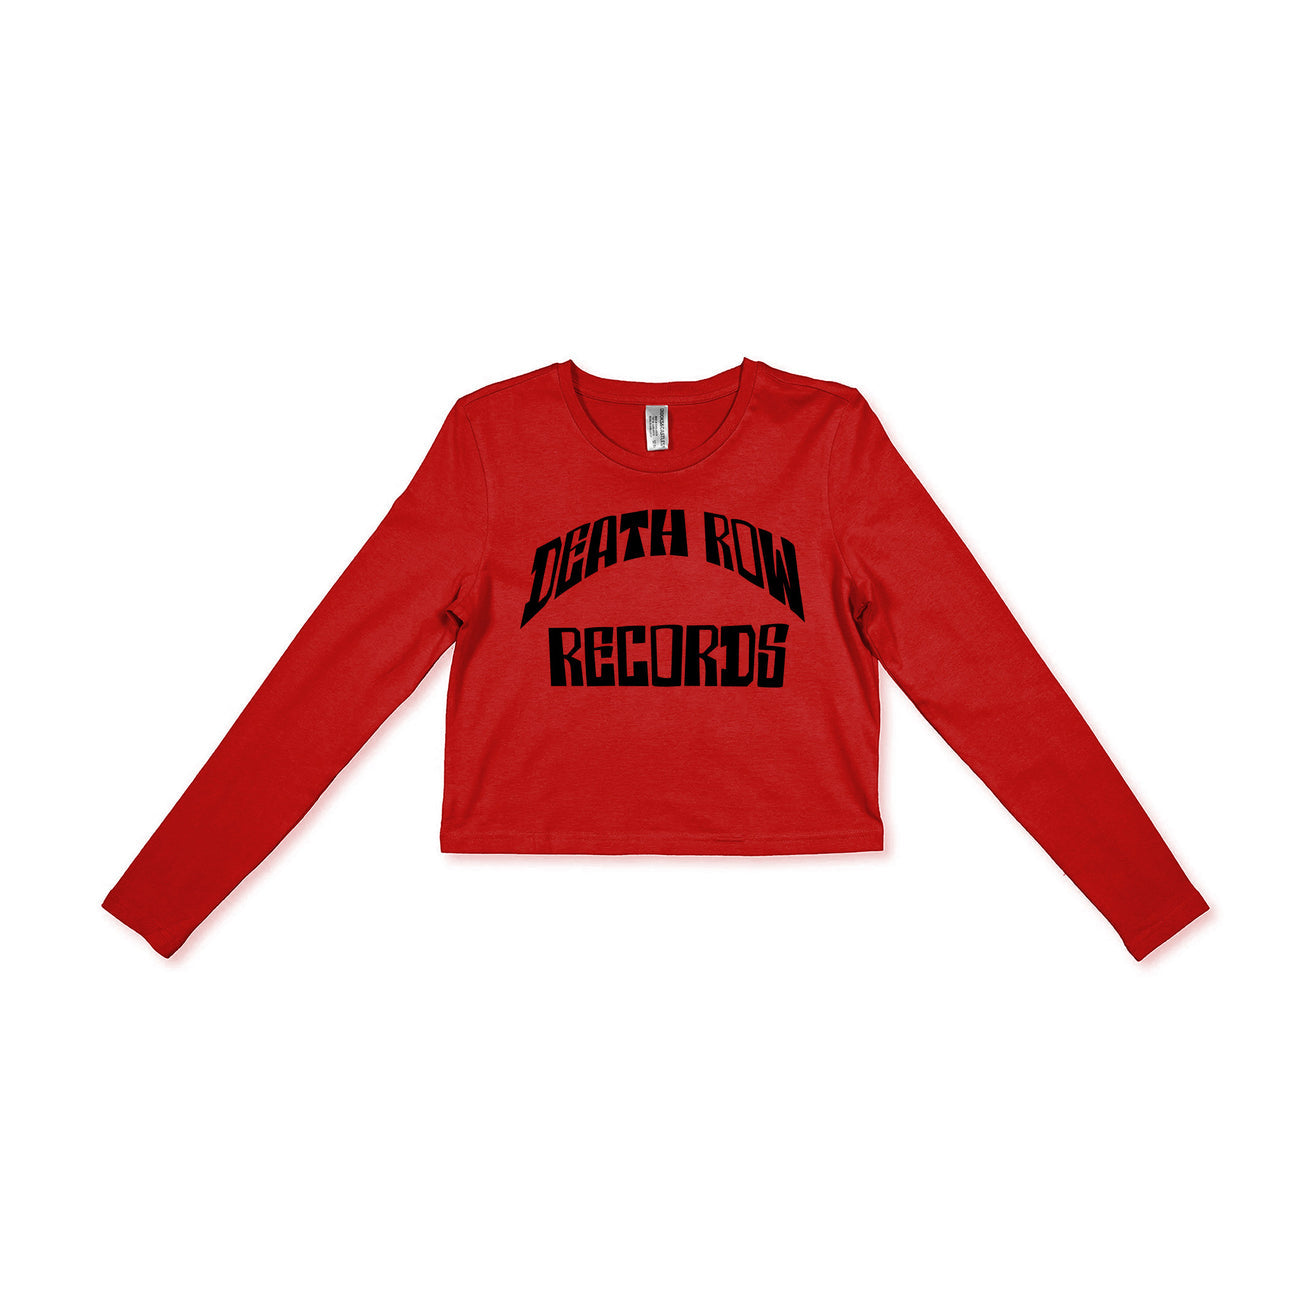 Women's Red Cropped L/S Tee